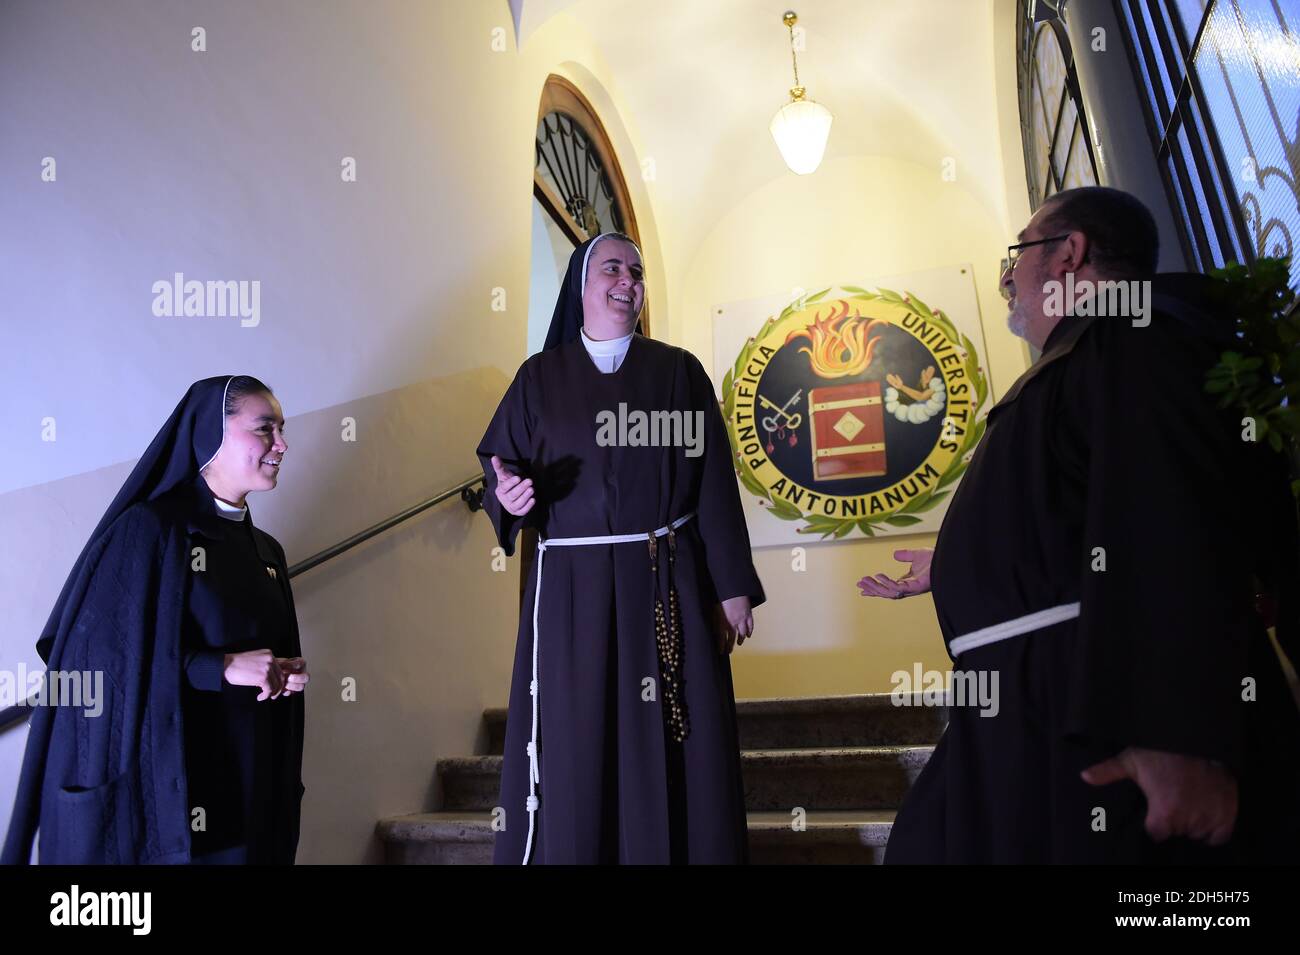 NO WEB/NO APPS - Exclusive. Franciscan Sister Mary Melone, 53, head of the Pontifical University Antonianum in Rome, Italy in December 2016. She is the first woman to head a pontifical university in the Eternal City. After finishing school with a specialization in classical studies, she joined the Franciscan Sisters of Blessed Angelina where she took her temporary vows in 1986 and then professed her perpetual vows in 1991. Although she believes in the important role that women can develop within the Church, she rejects the definition of a specific feminine theology and distrusts gender quotas, Stock Photo